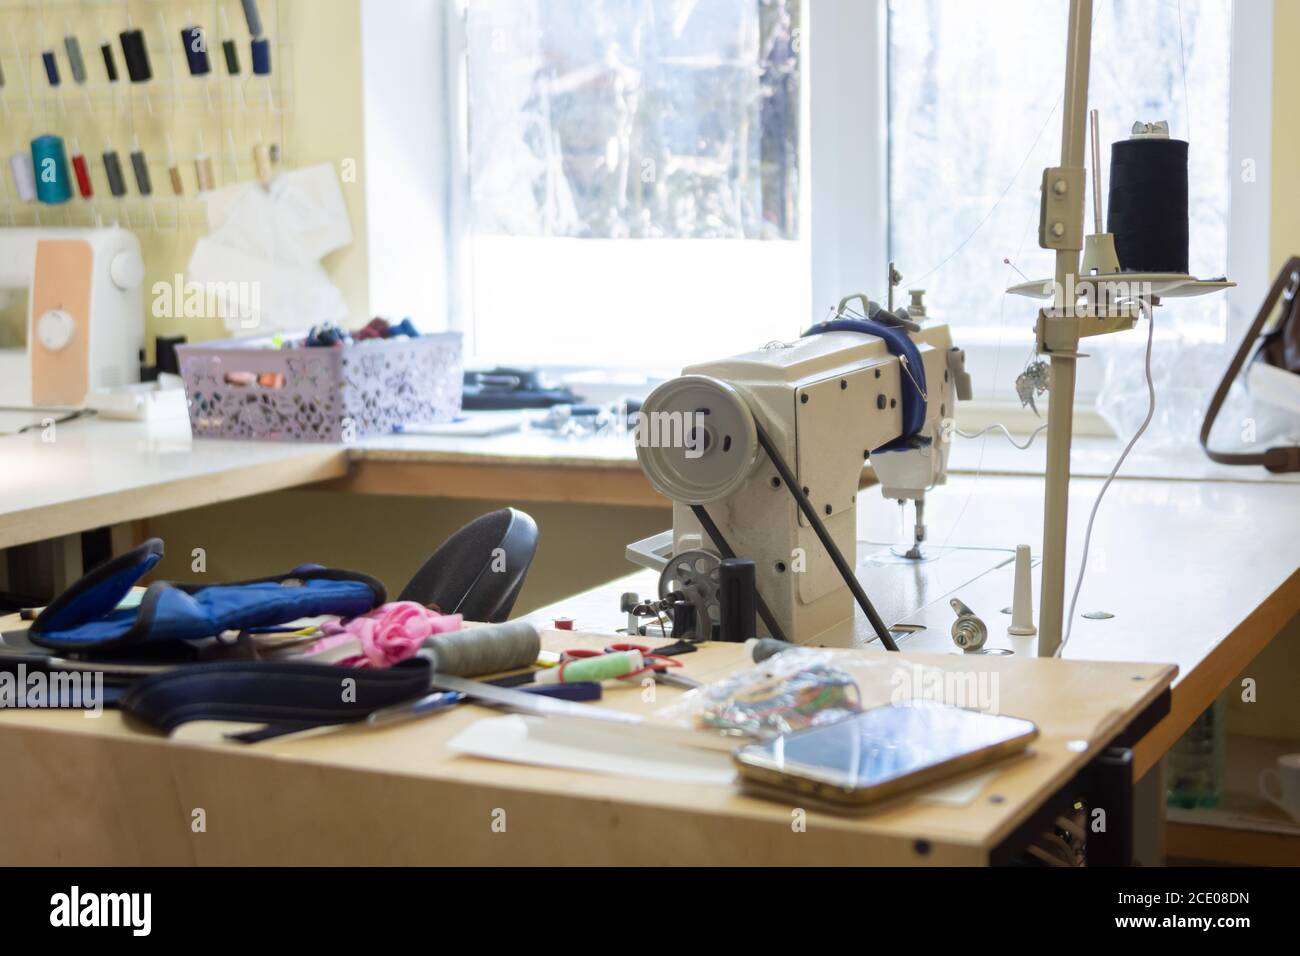 seamstresses in workshop with industrial sewing equipment Stock Photo